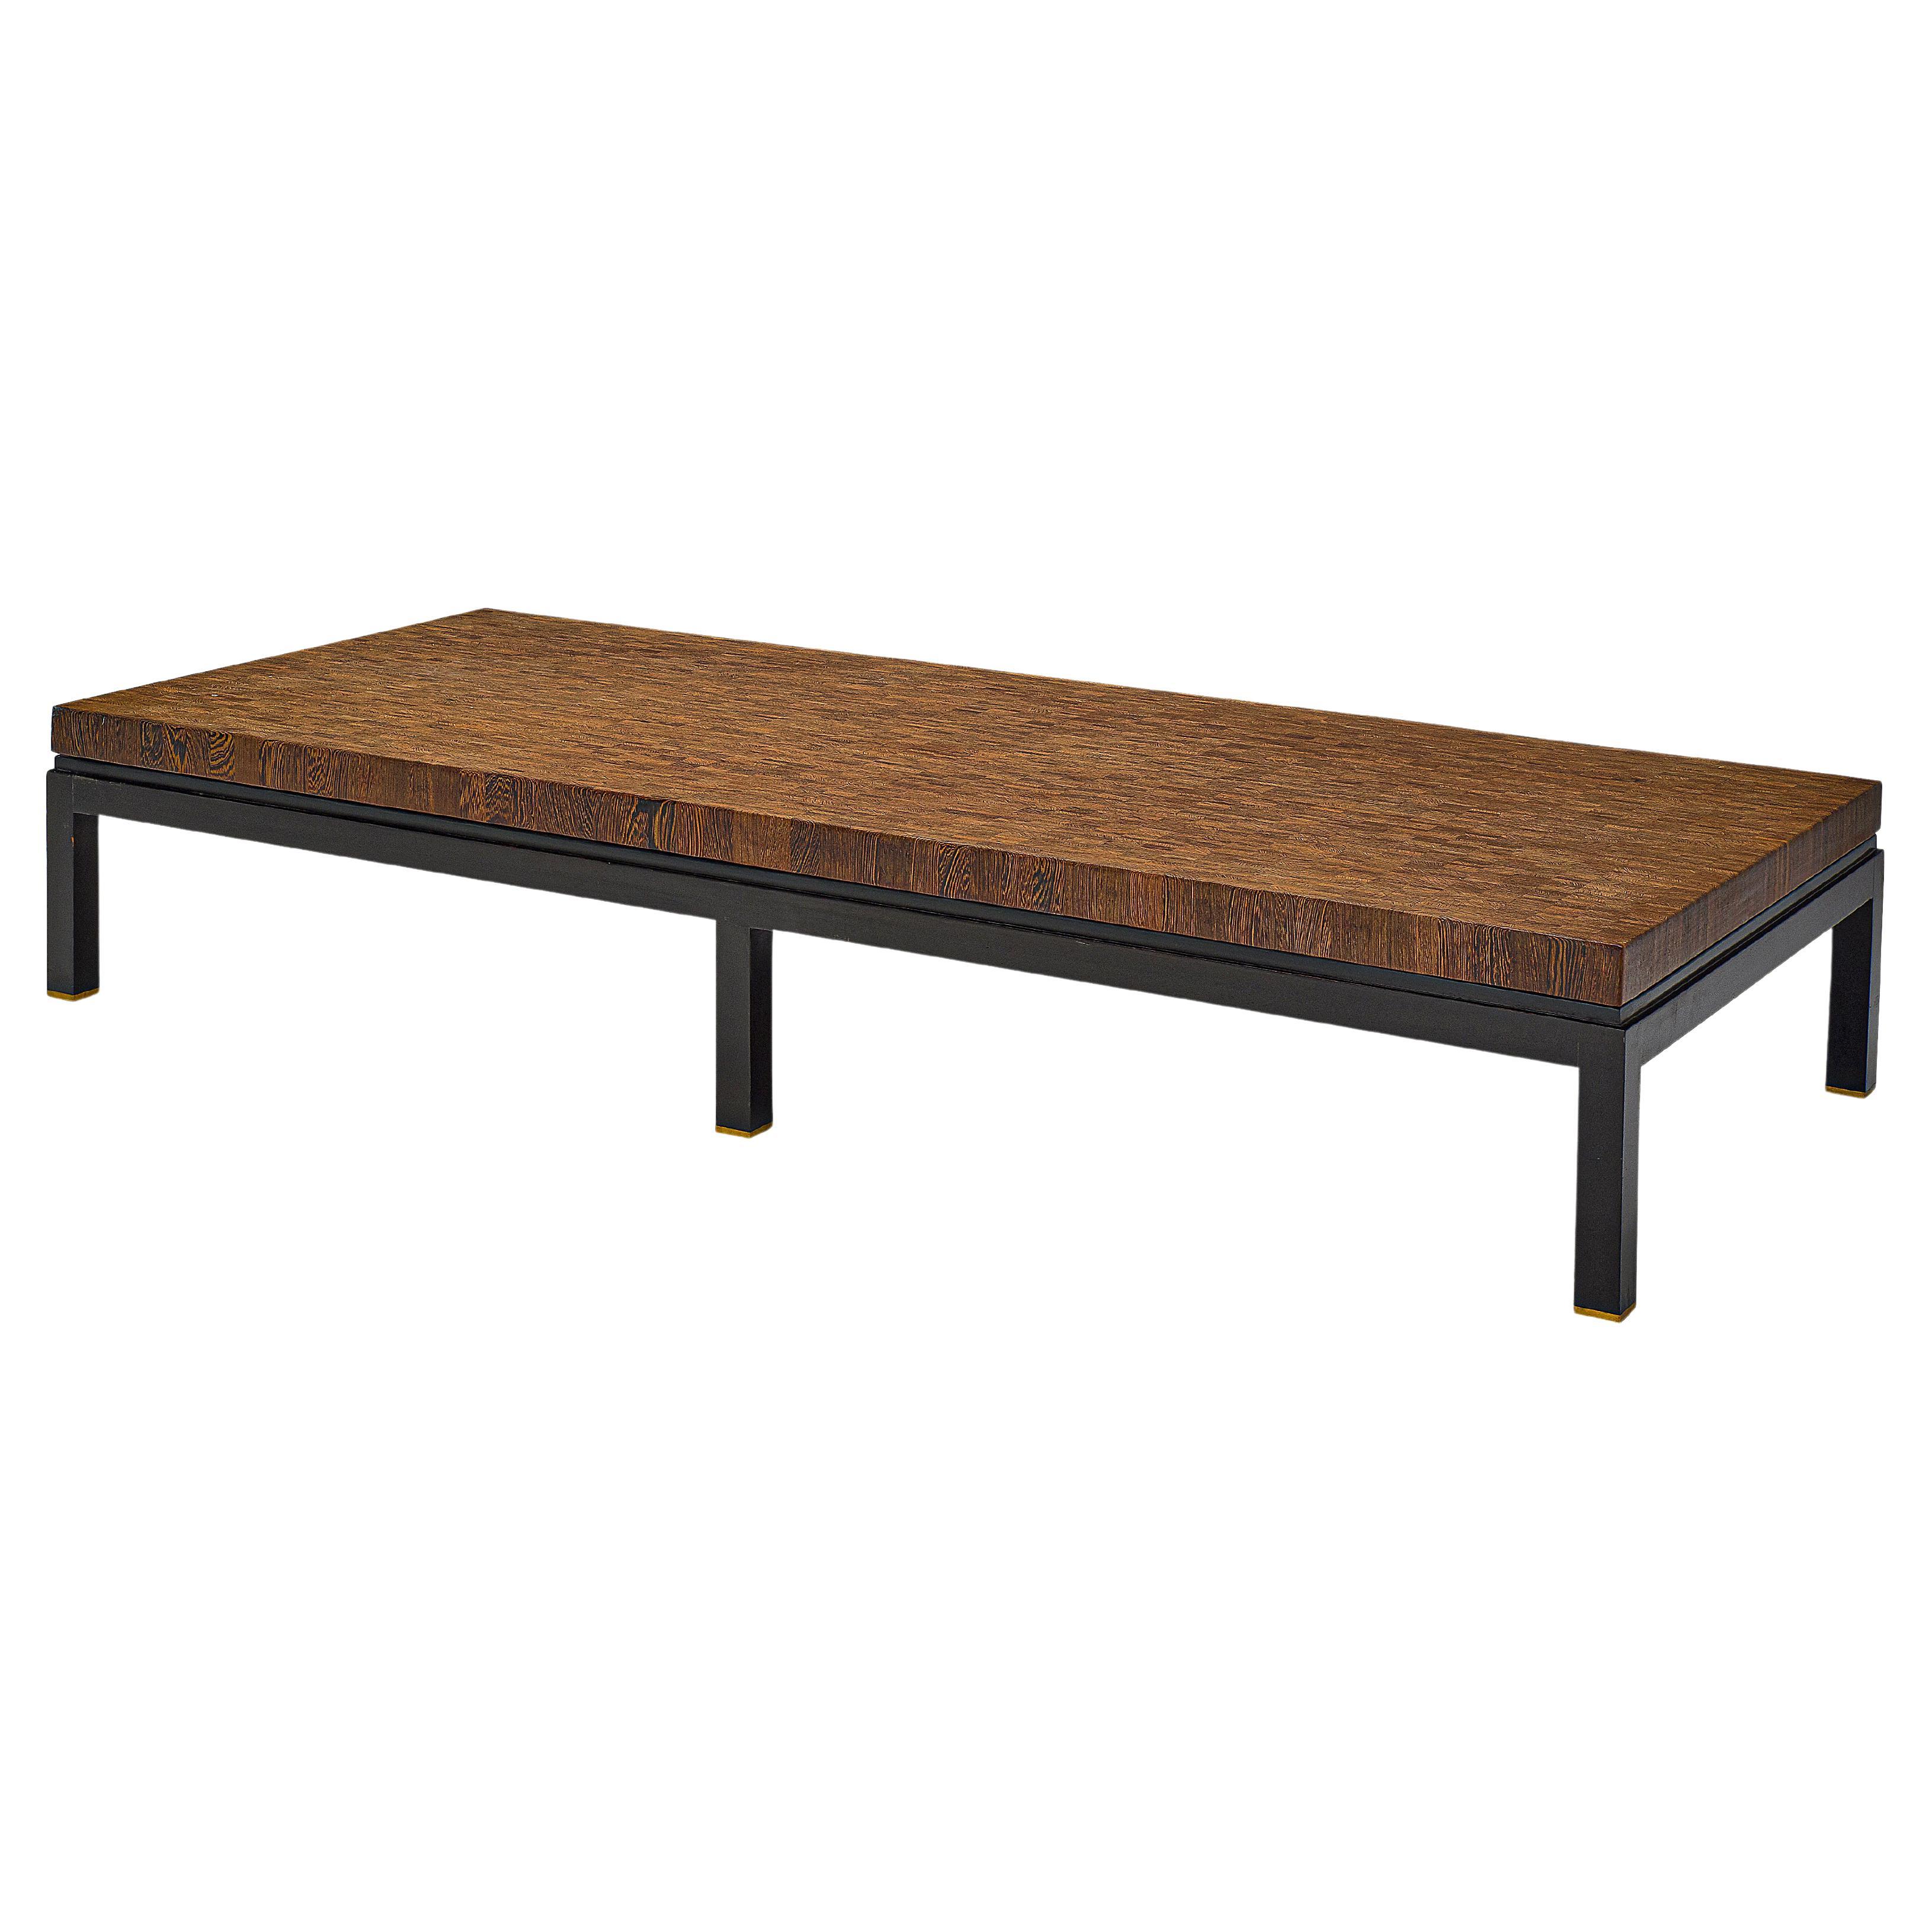 Jules Wabbes Large Coffee Table in Wengé